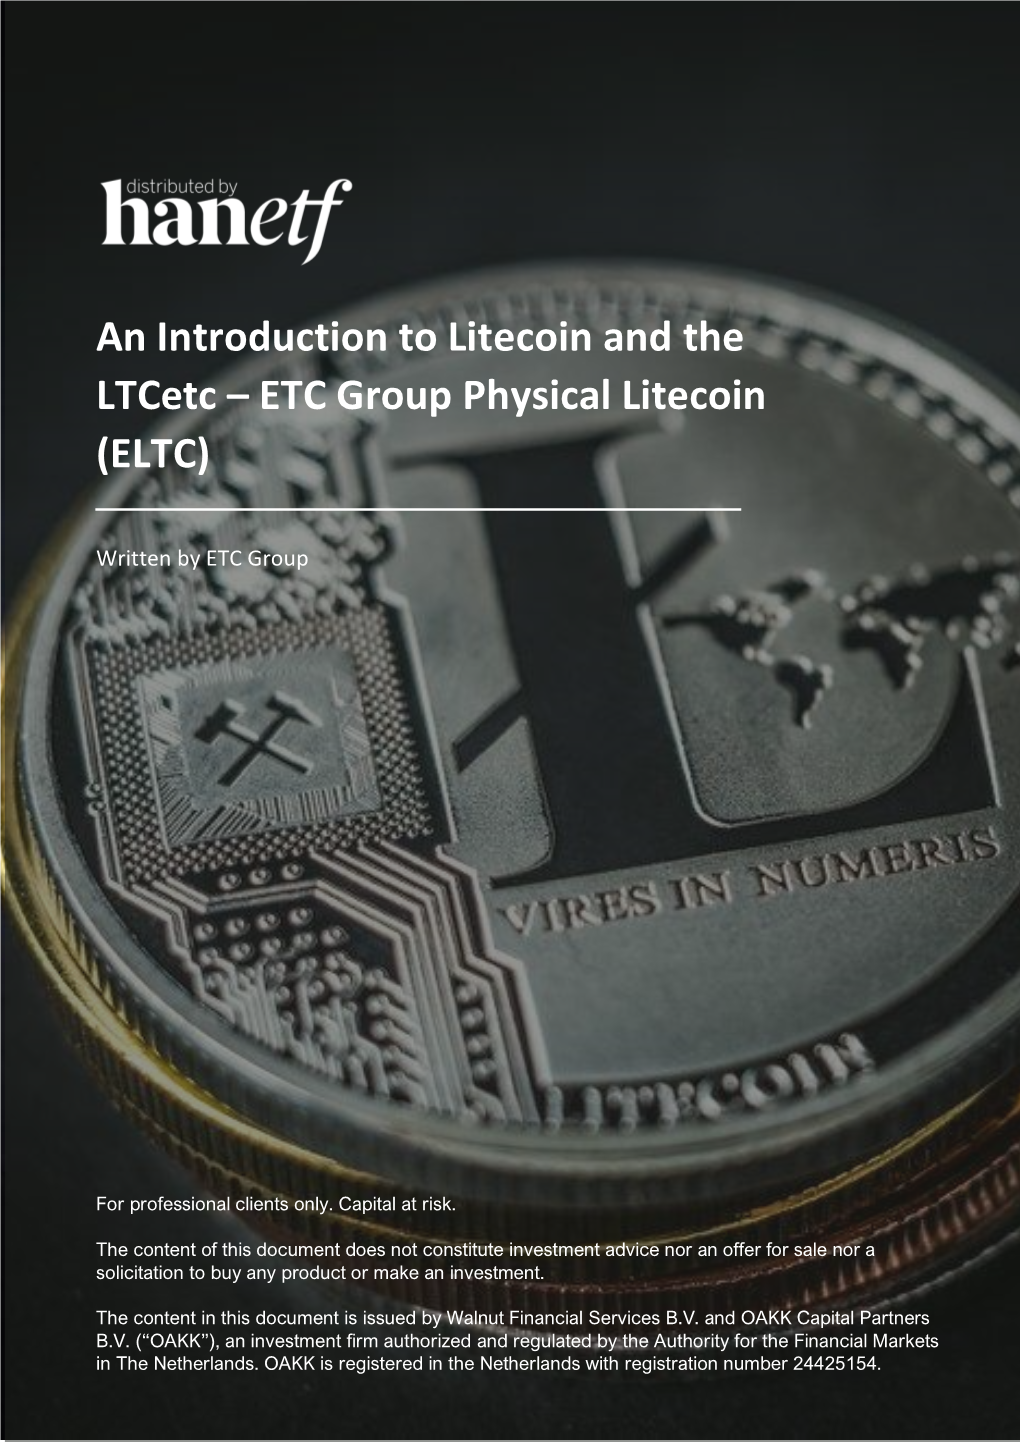 An Introduction to Litecoin and the Ltcetc – ETC Group Physical Litecoin (ELTC)